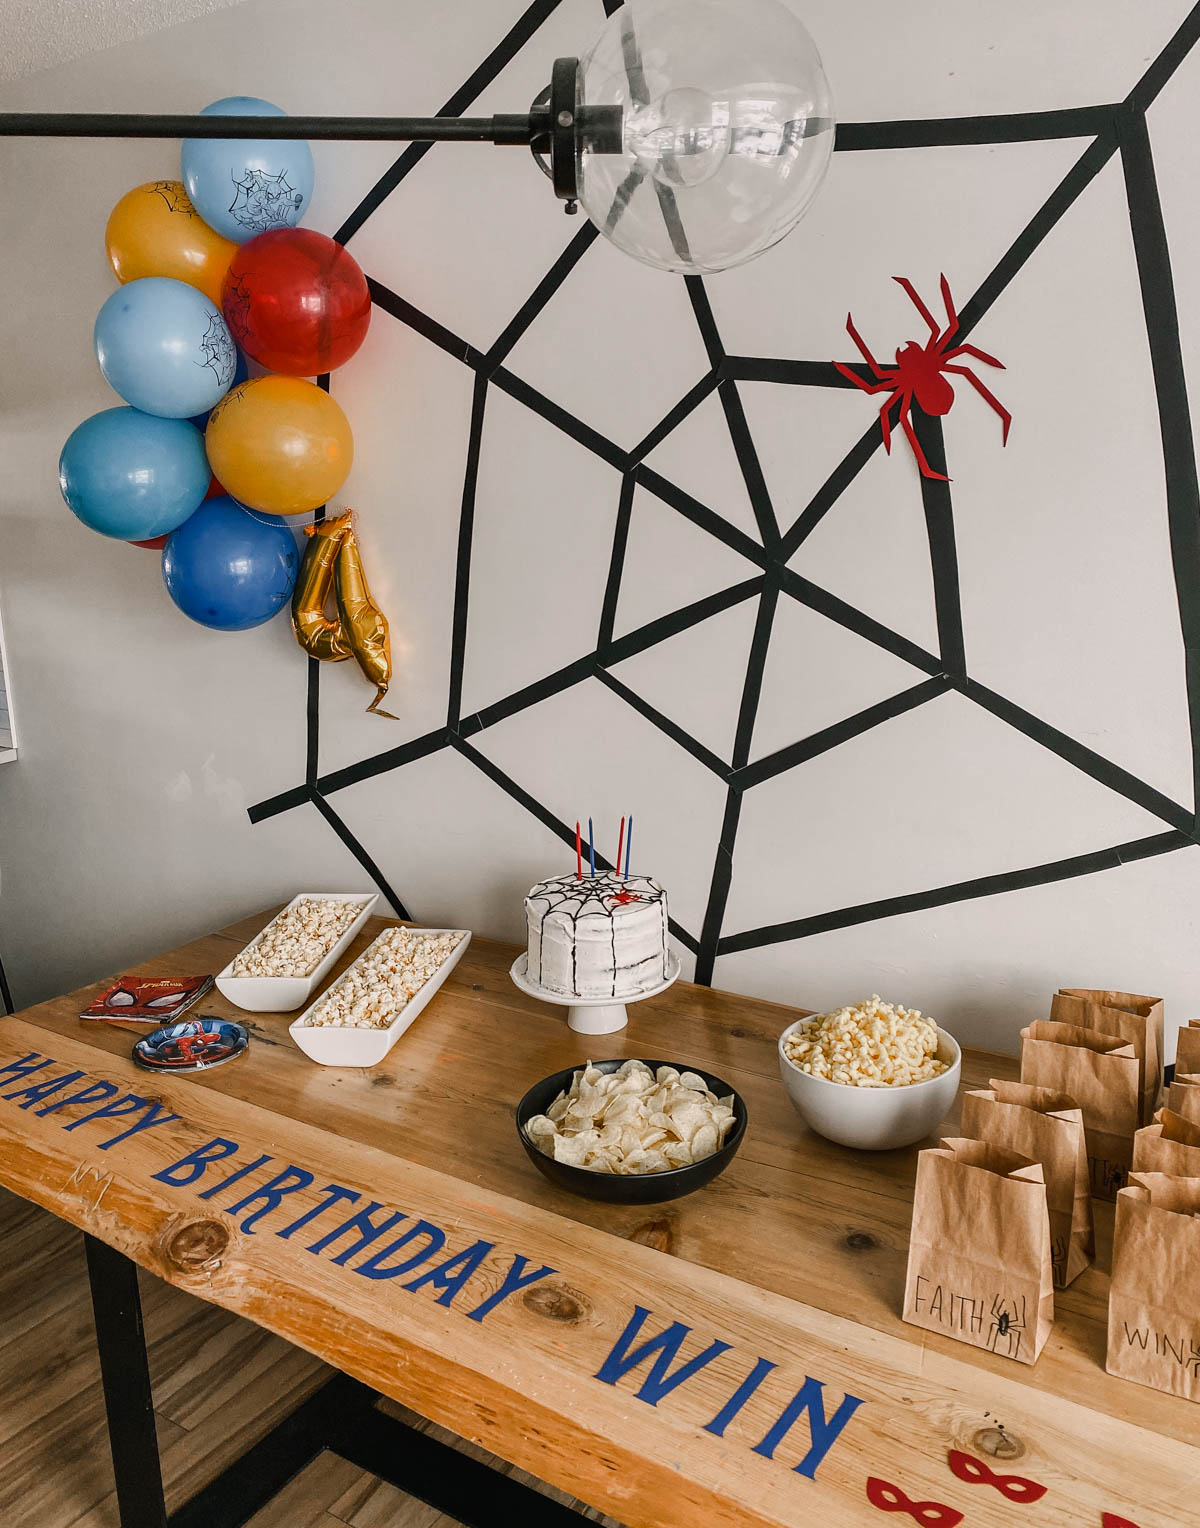 DIY Spiderman party decor, giant spiderweb and a bunch of balloons as a backdrop